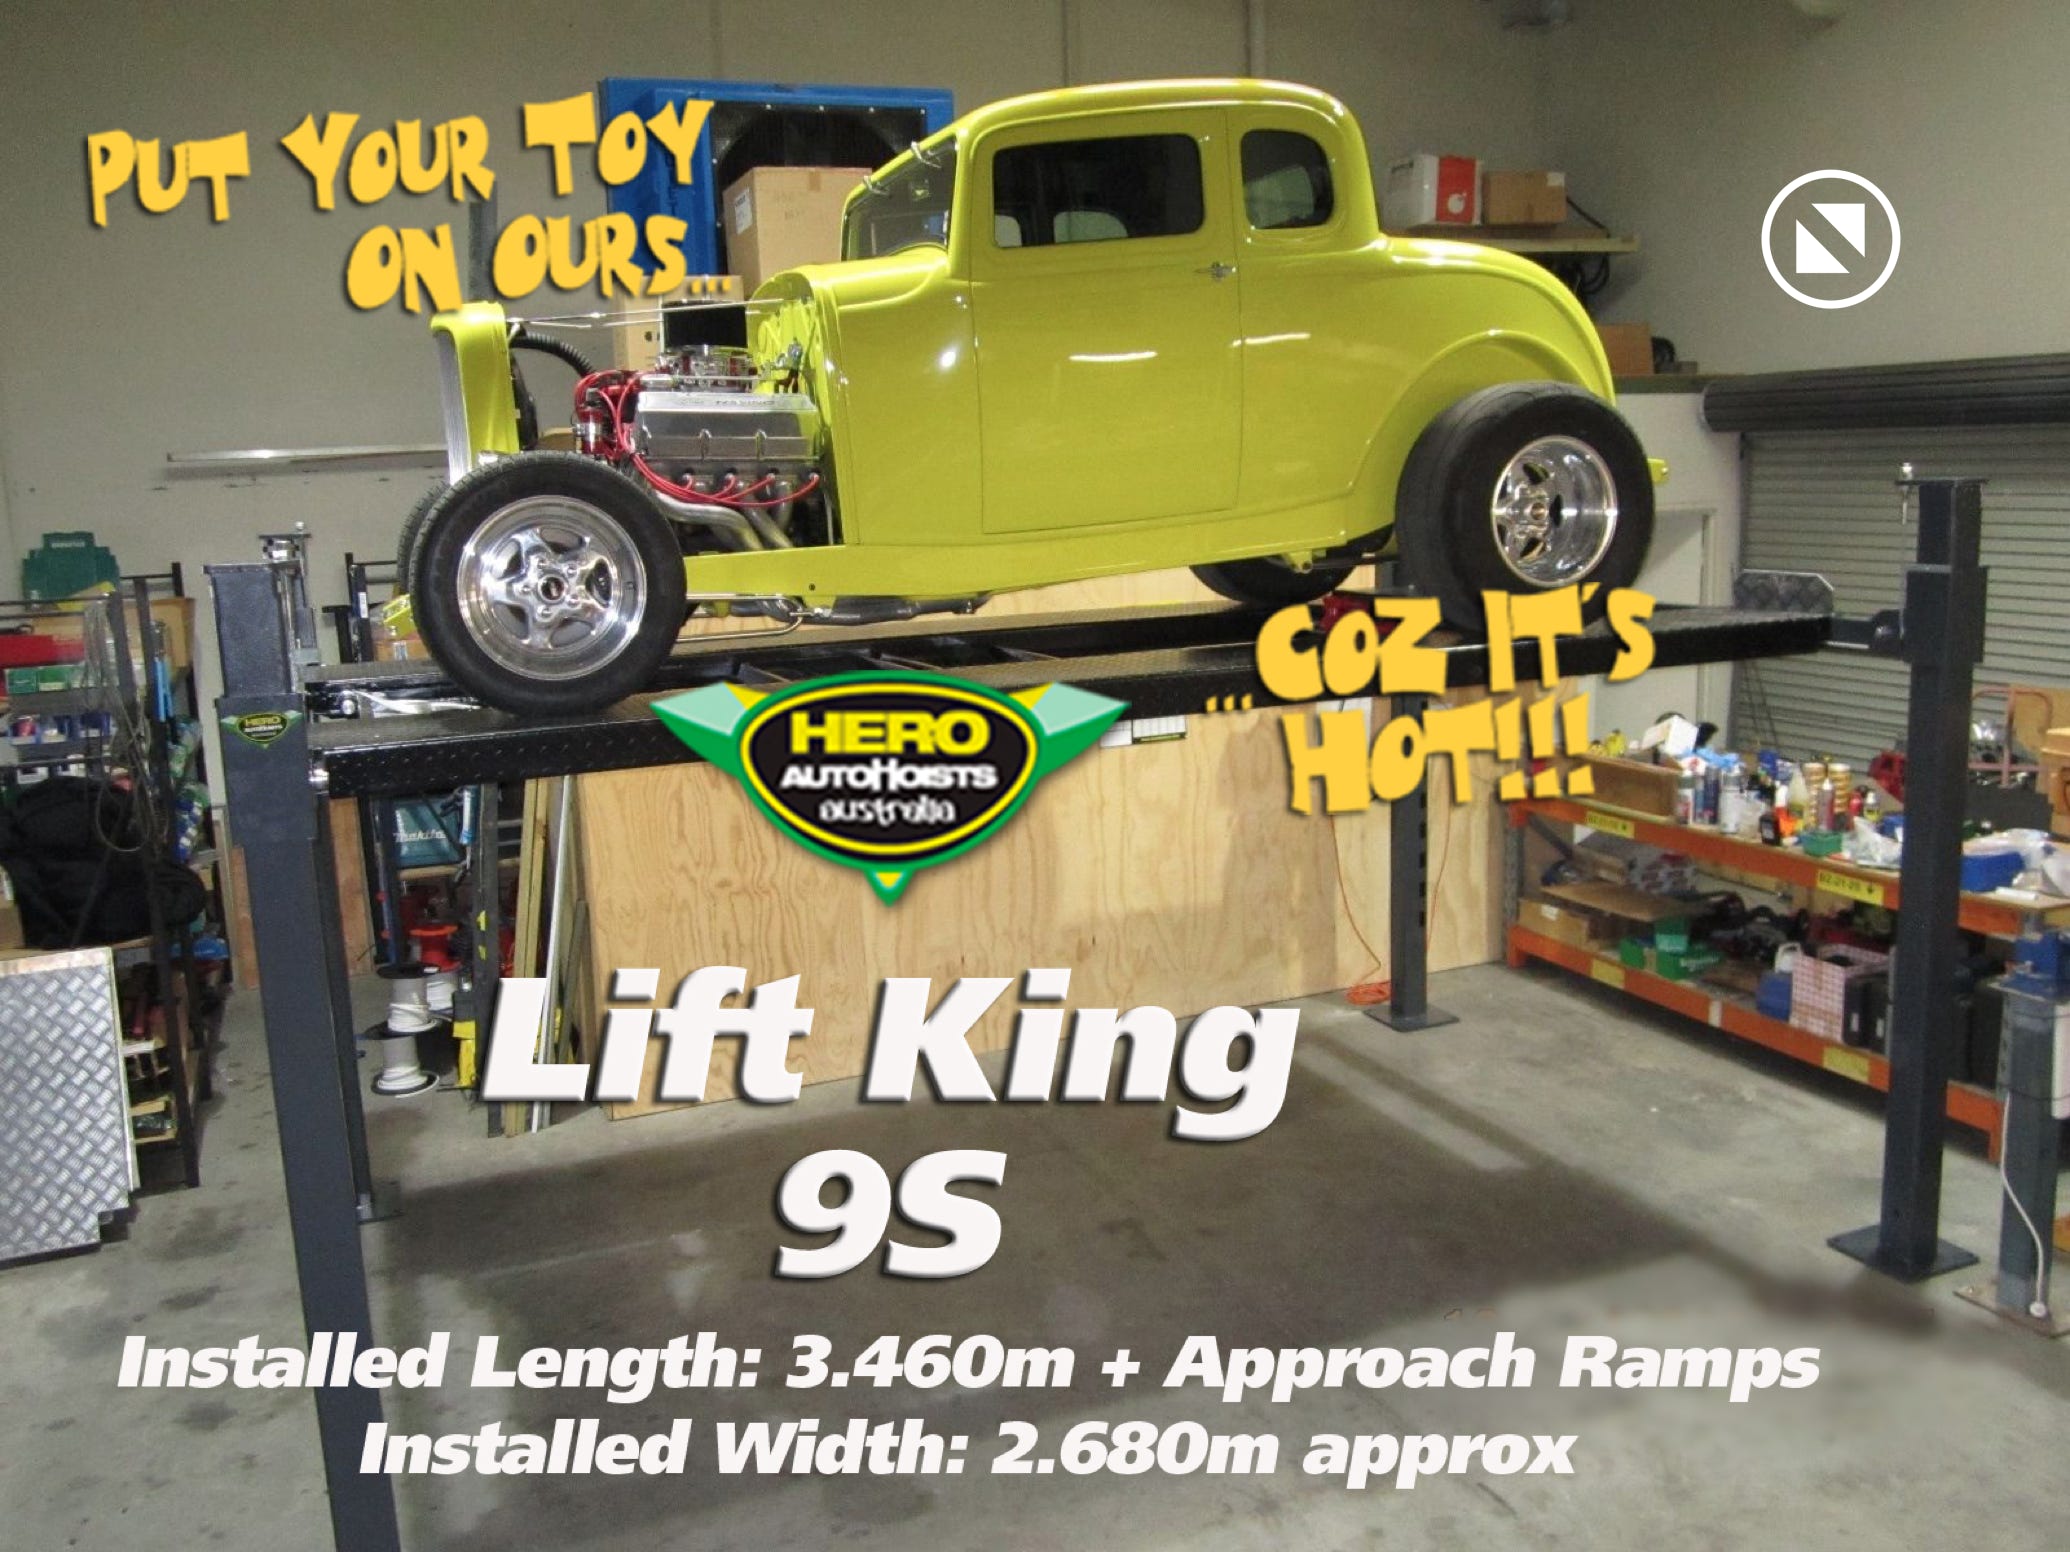 Lift King 9S - great for small spaces and average to compact size cars...